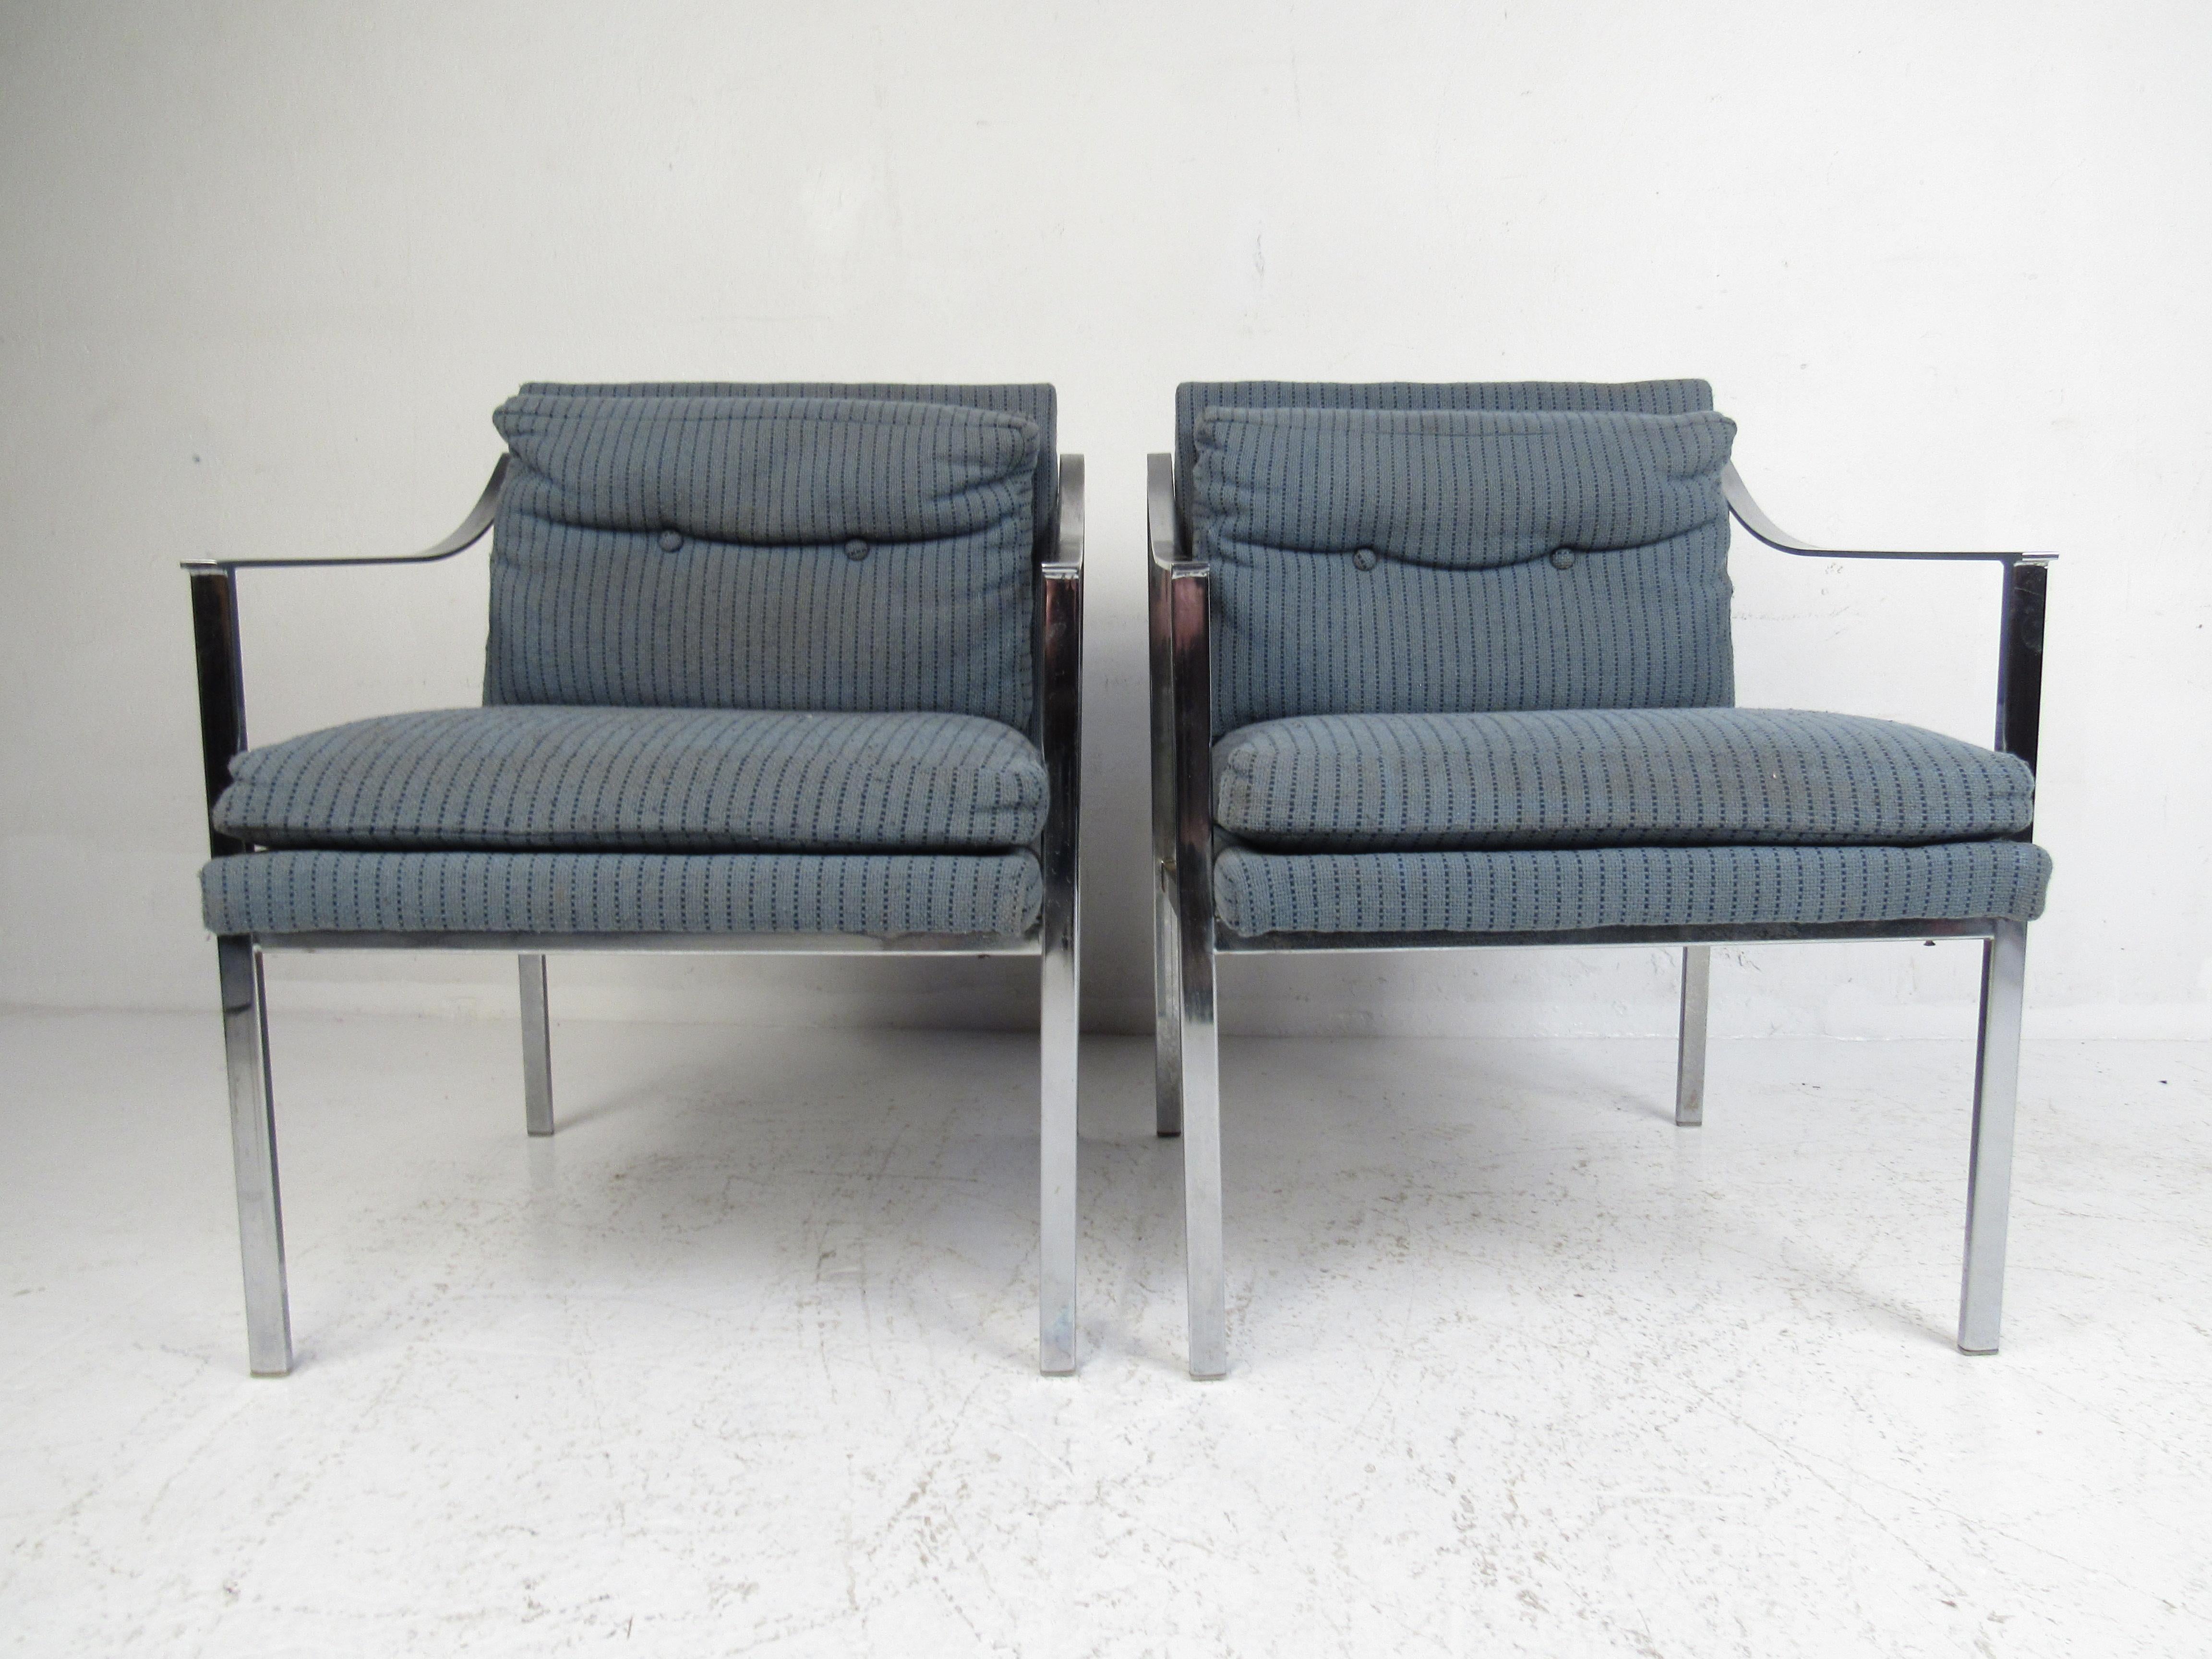 Pair of Mid-Century Modern Chrome Lounge Chairs In Good Condition For Sale In Brooklyn, NY